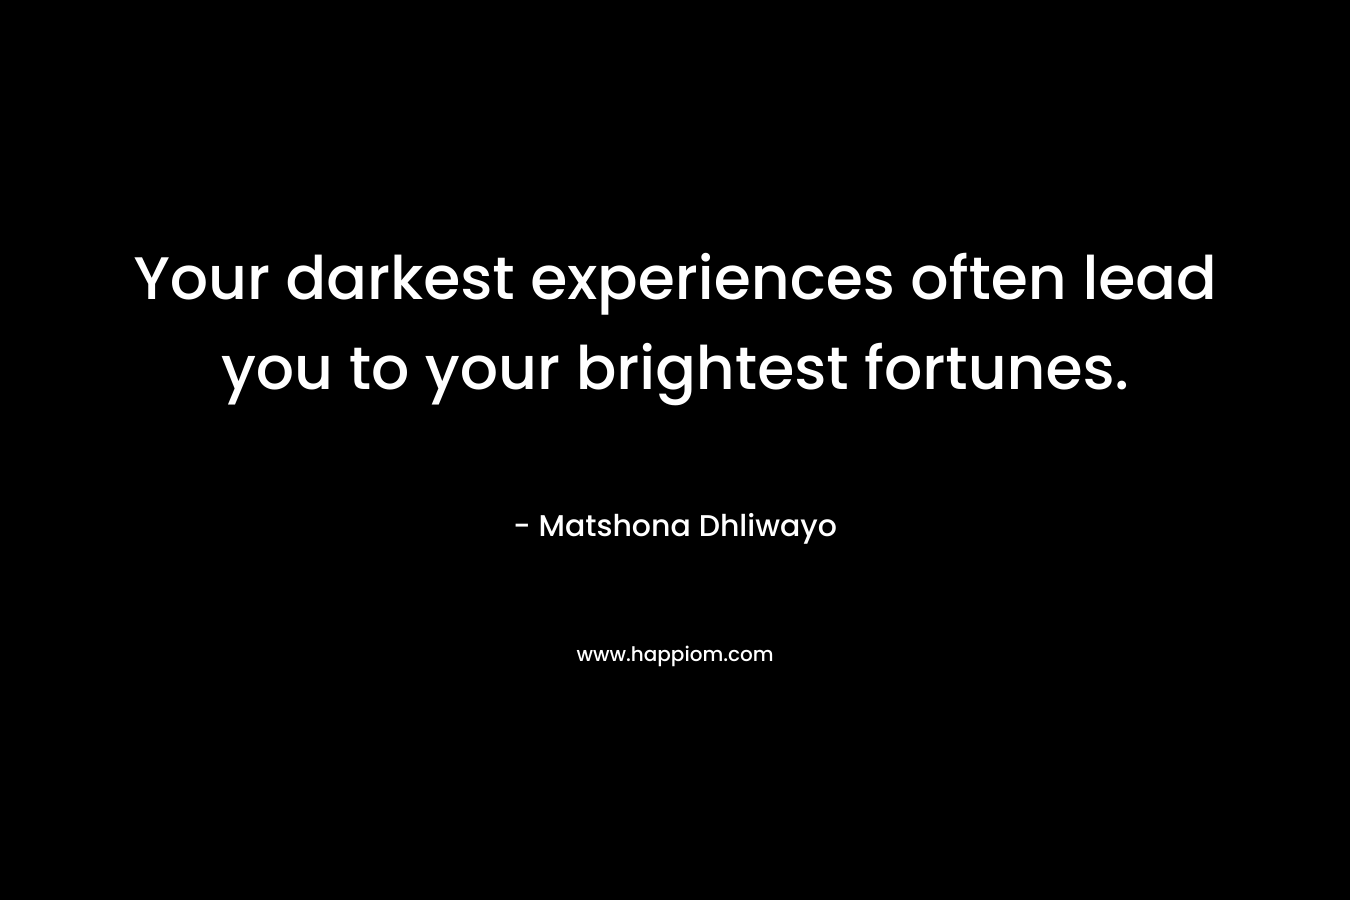 Your darkest experiences often lead you to your brightest fortunes.